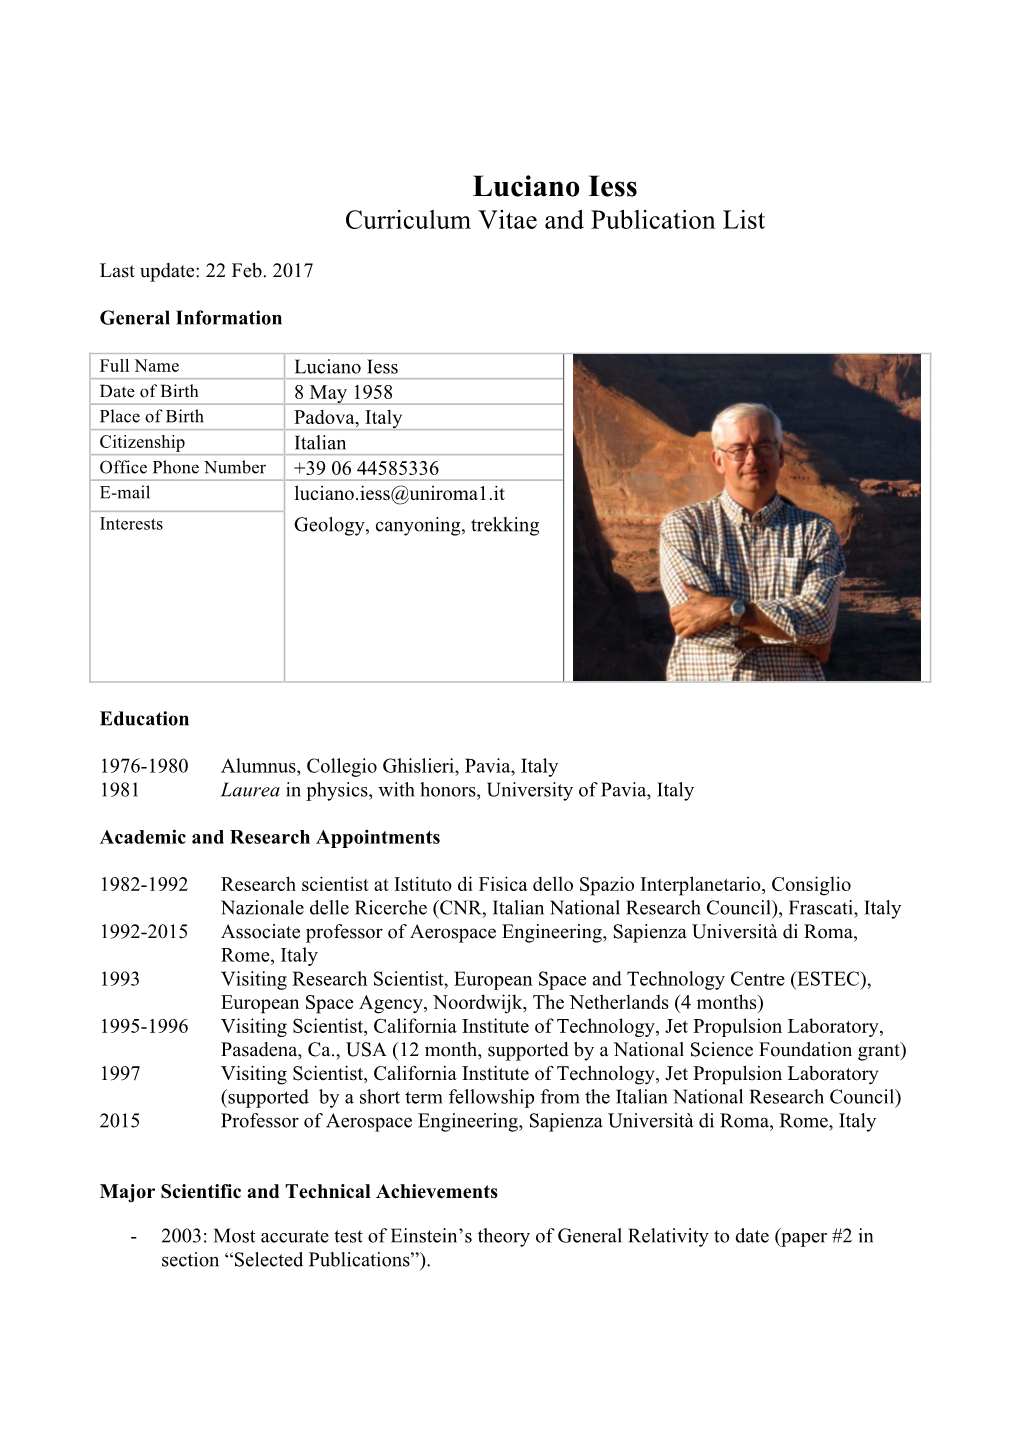 Luciano Iess Curriculum Vitae and Publication List